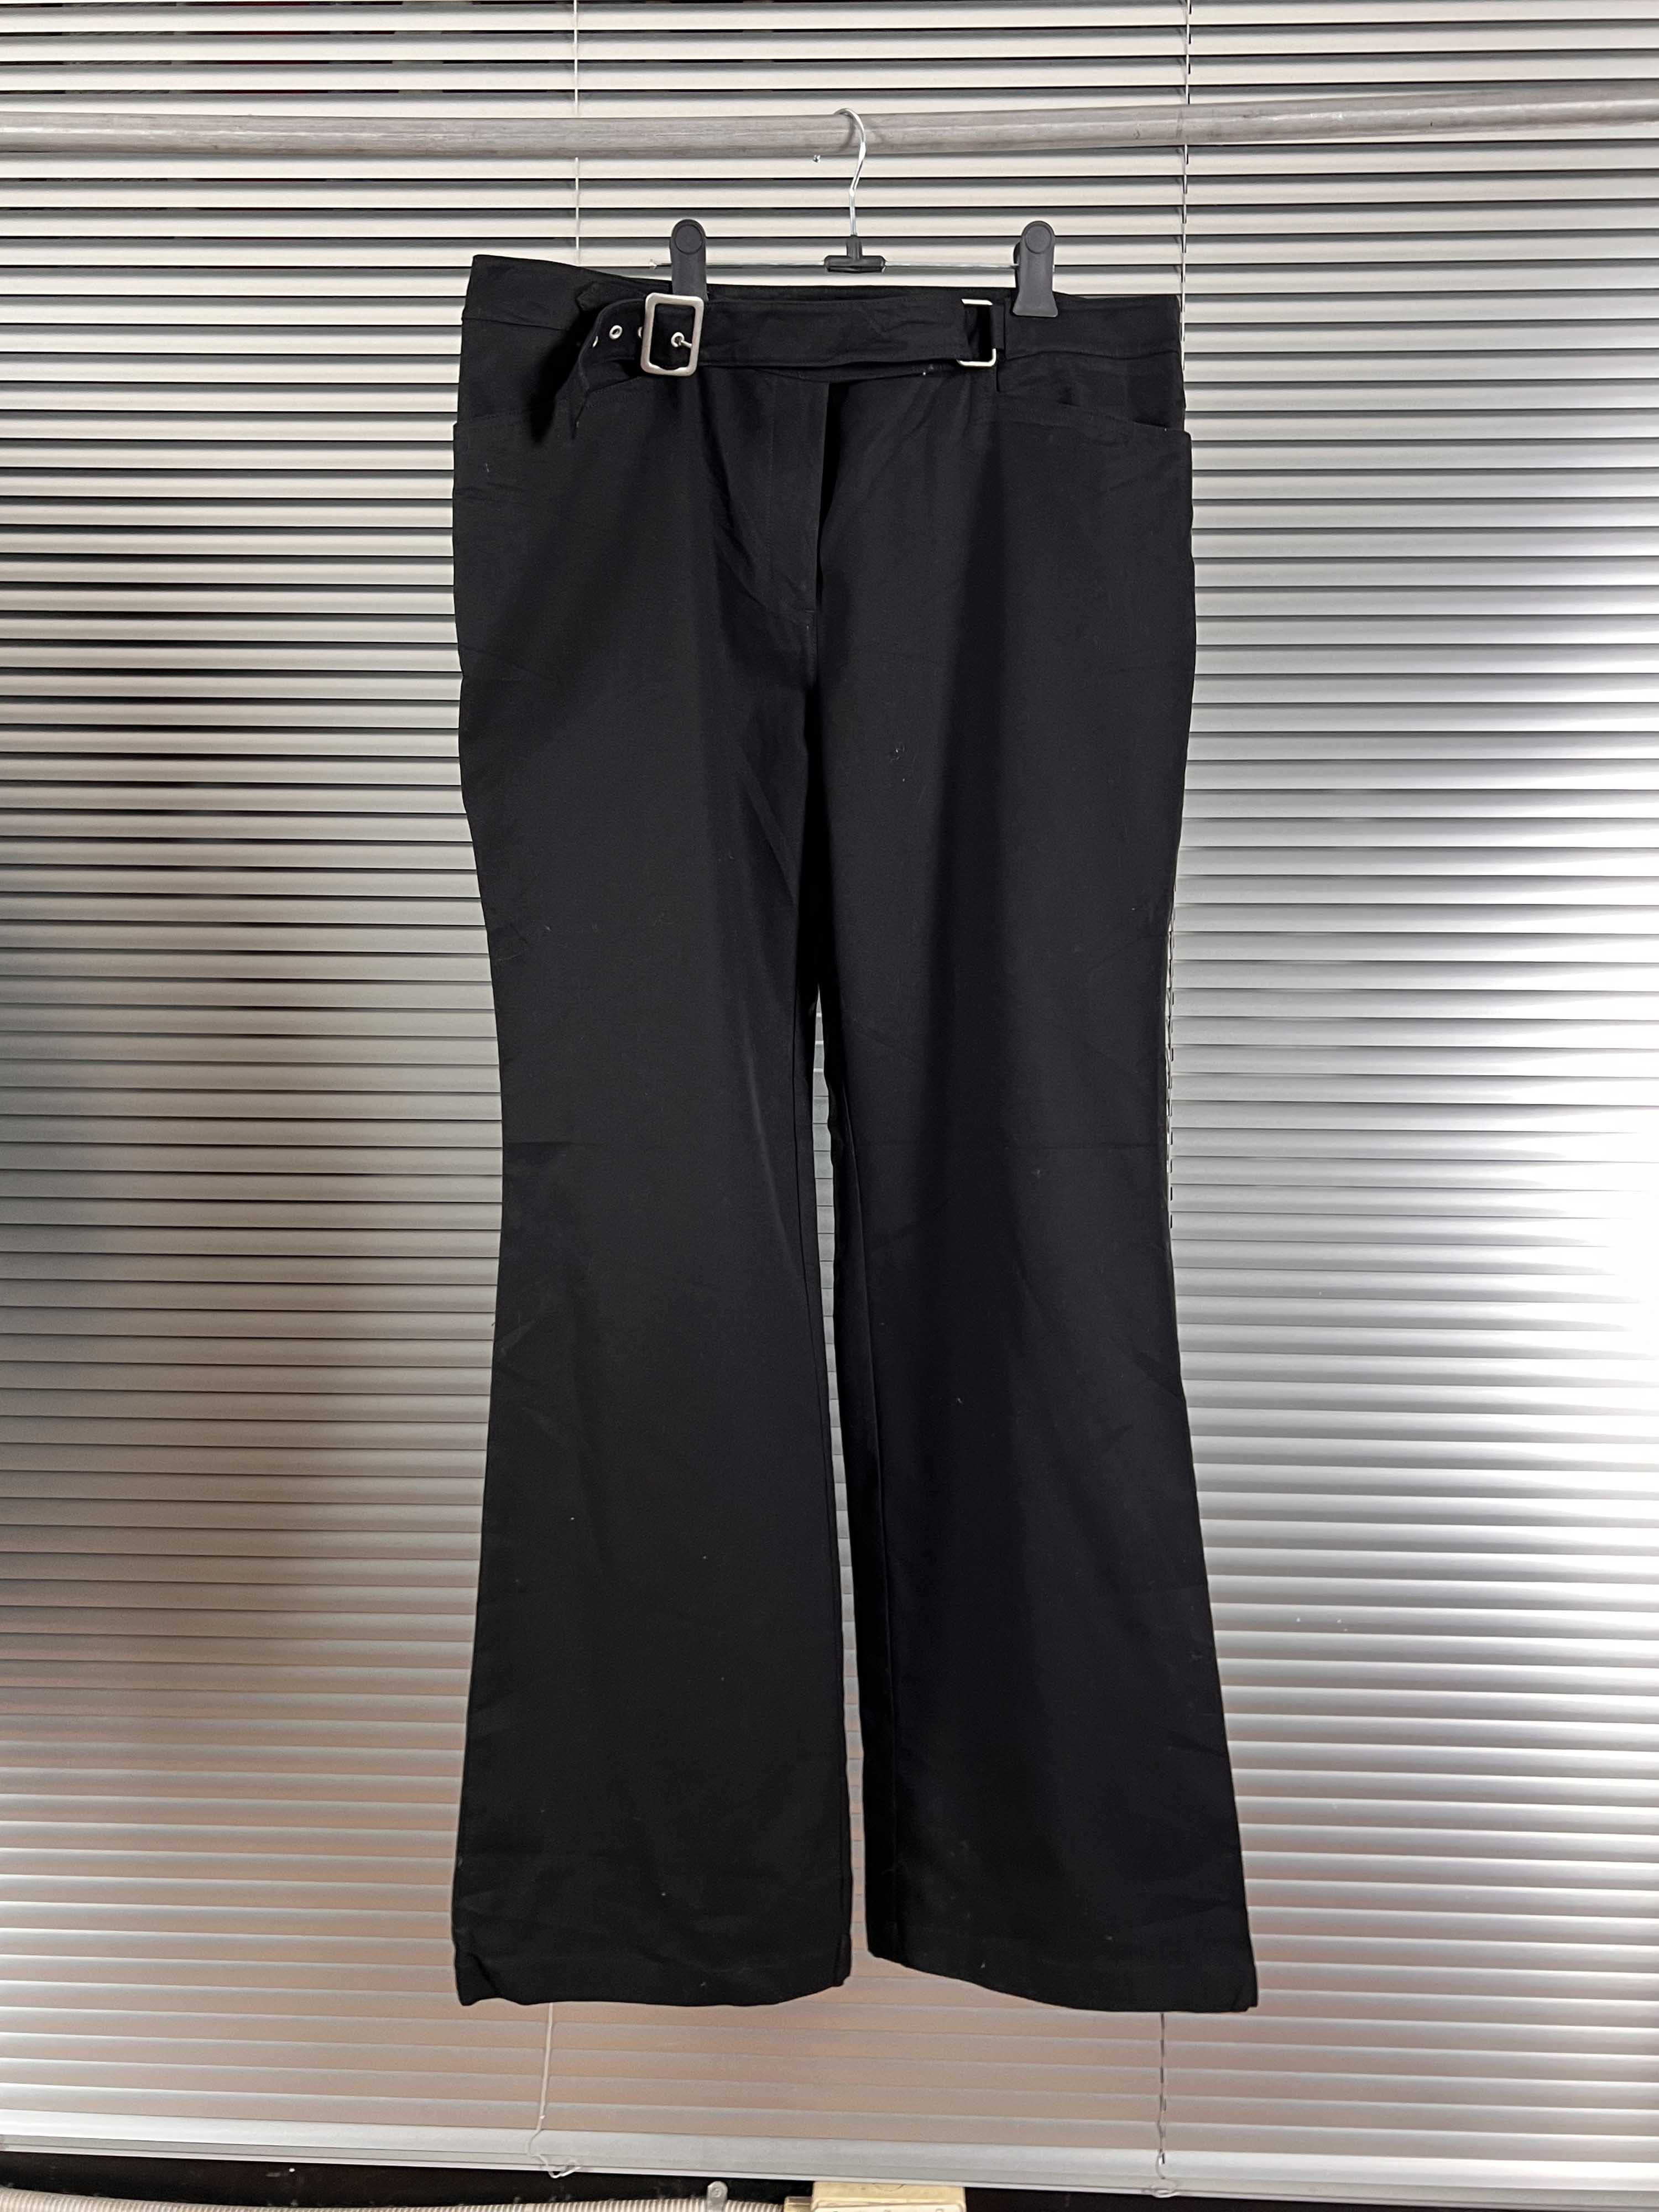 NEXT belted pants